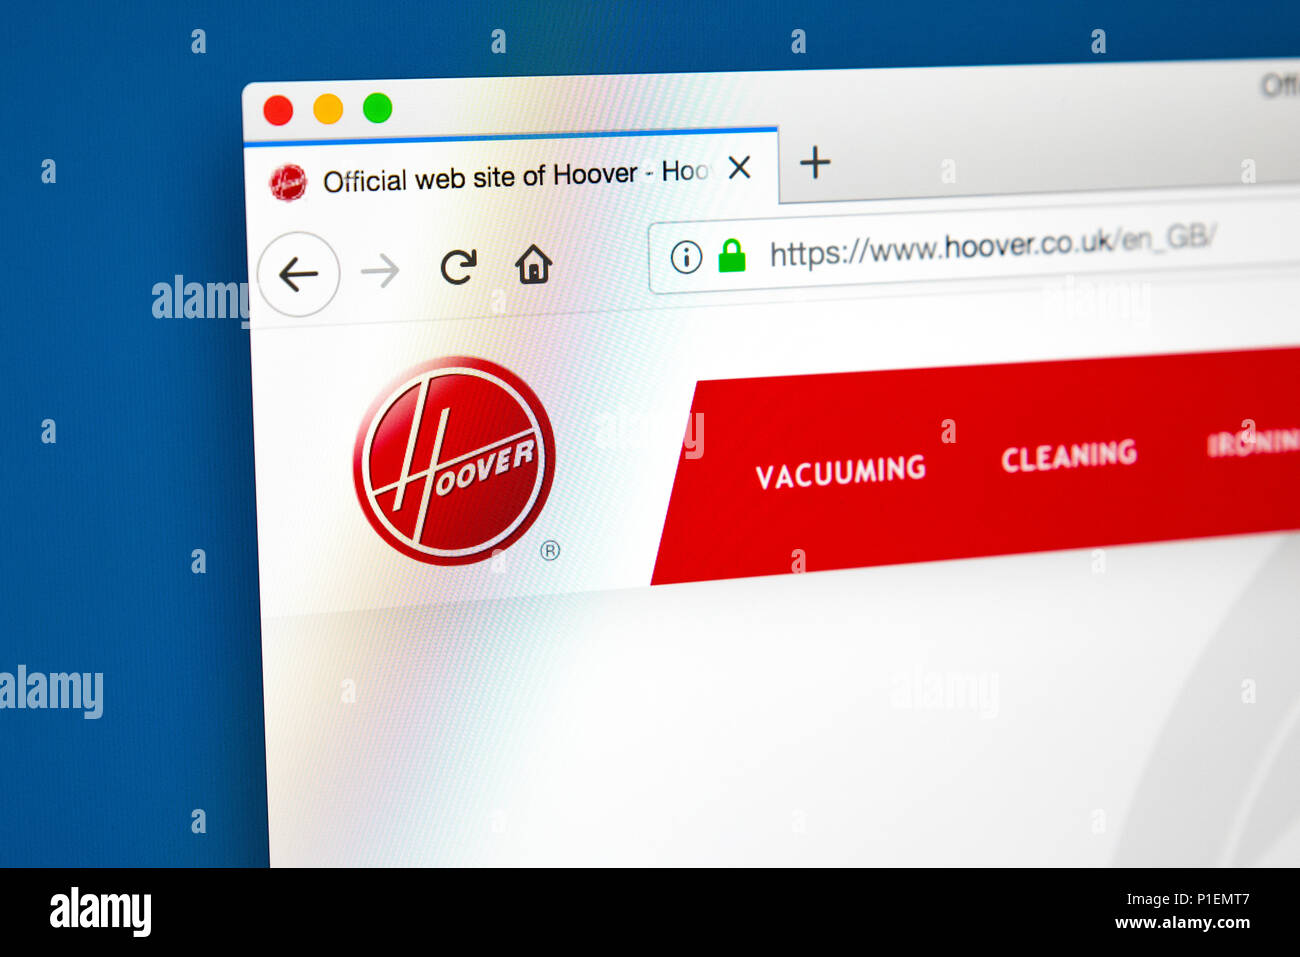 LONDON, UK - MAY 17TH 2018: The homepage of the official website for Hoover - the domestic applicance brand, on 17th May 2018. Stock Photo